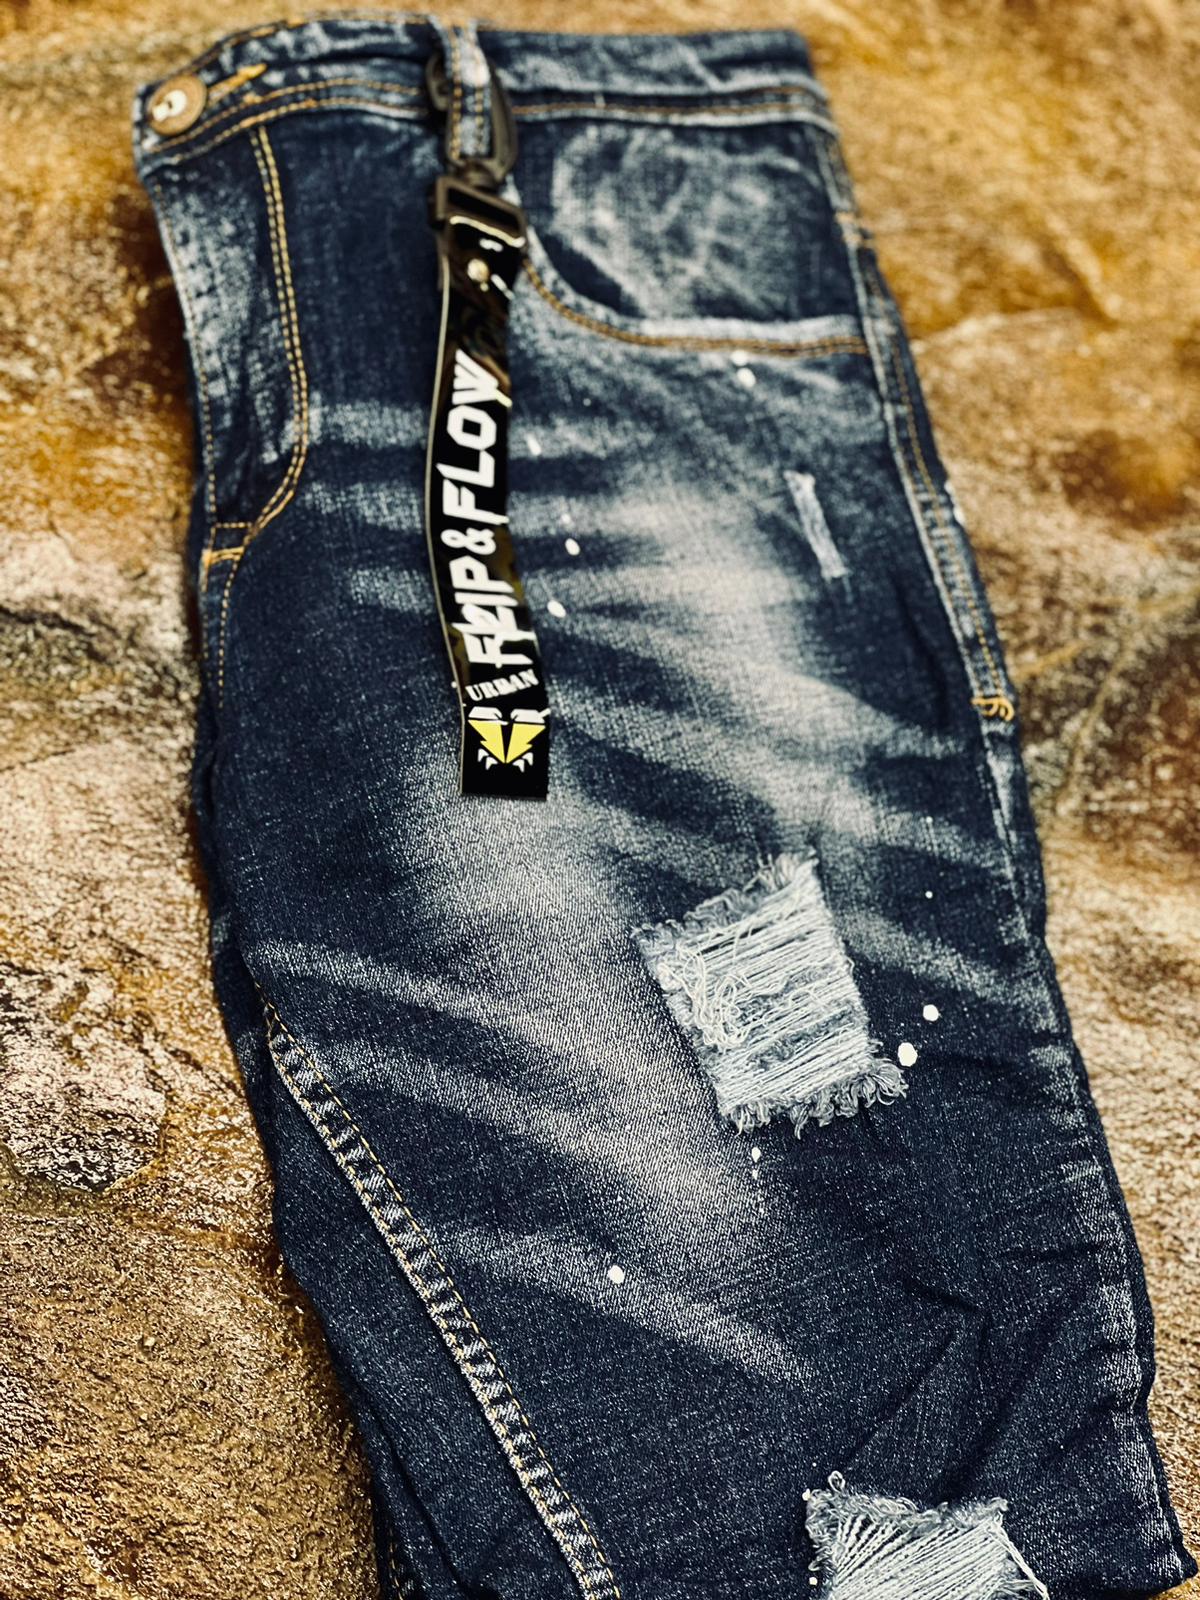 Colombian Jeans Cold Prints